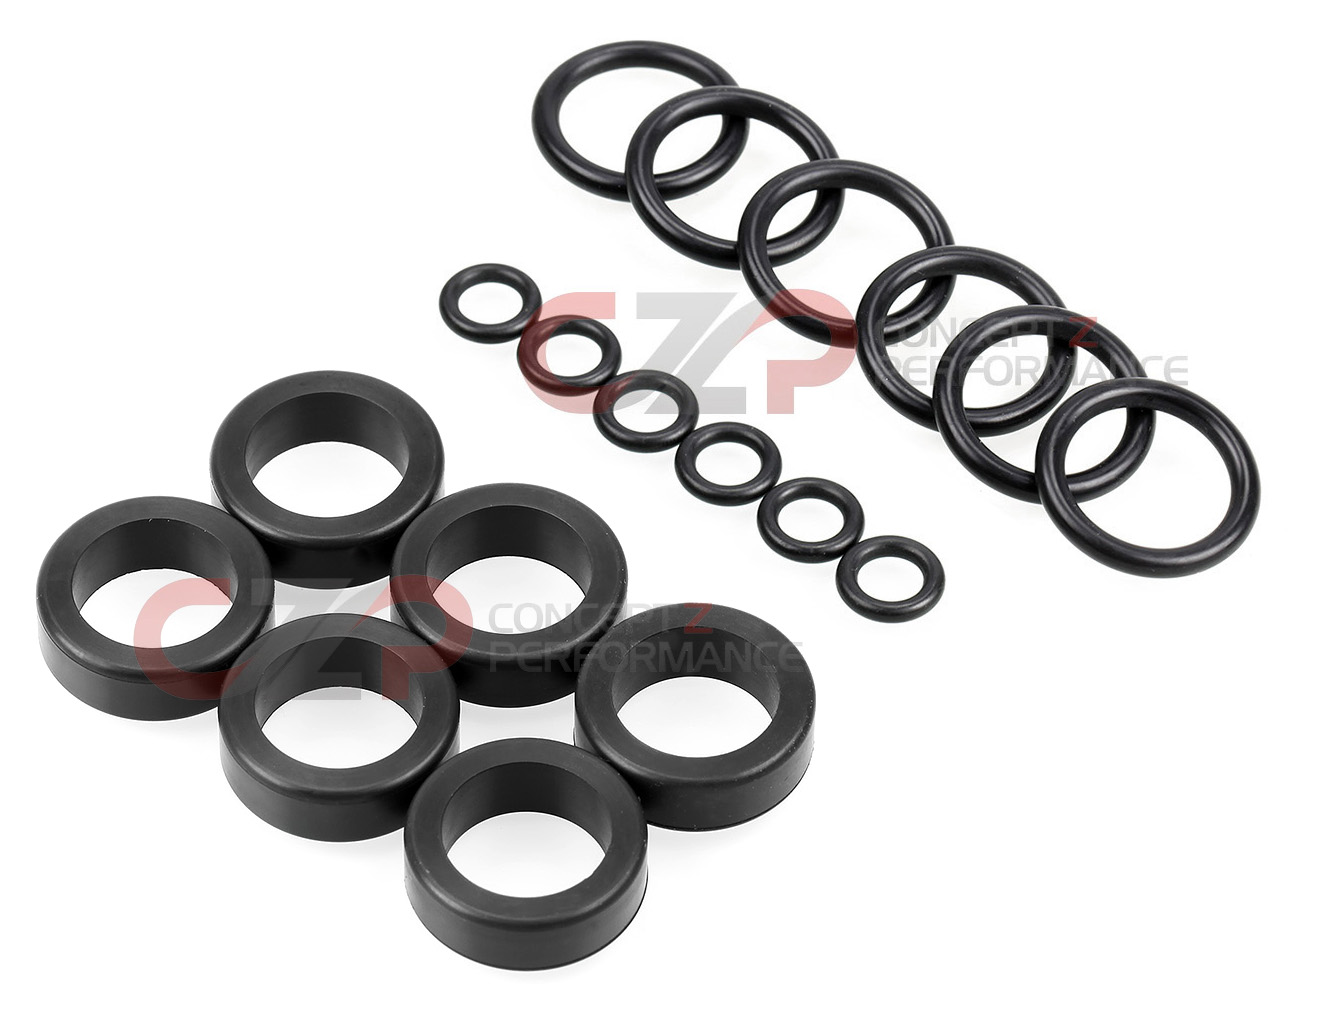 CZP Buna-N Fuel Injector O-Ring & Lower Insulator Set, Later Style Injectors - Nissan 300ZX Z32